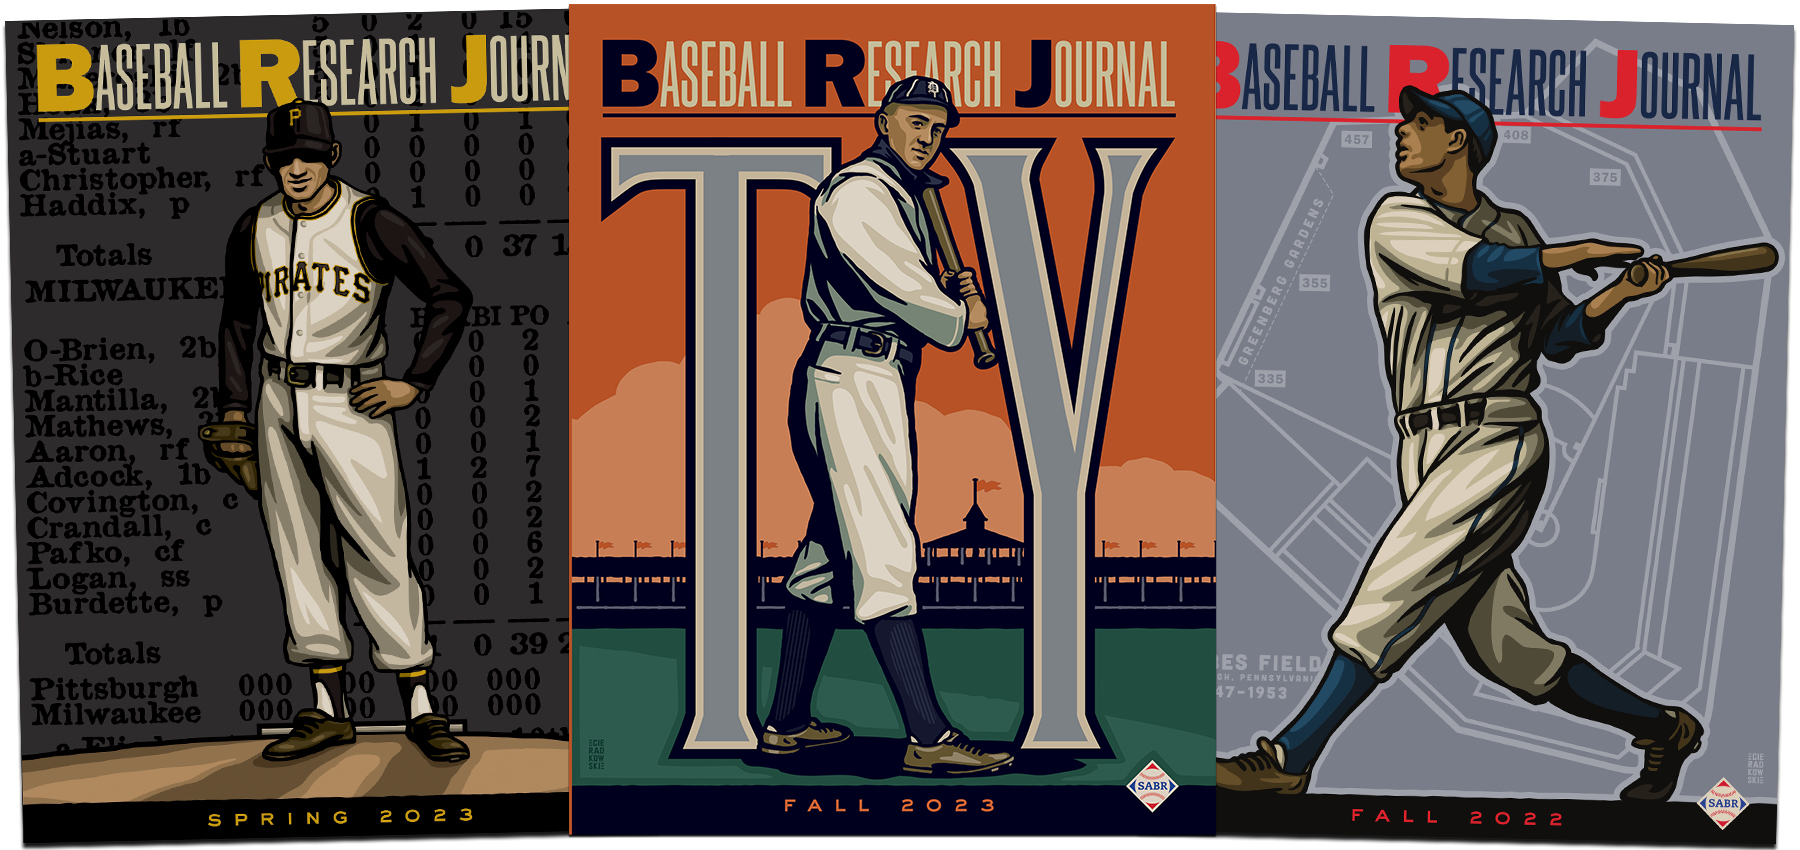 SABR Baseball Research Journal covers